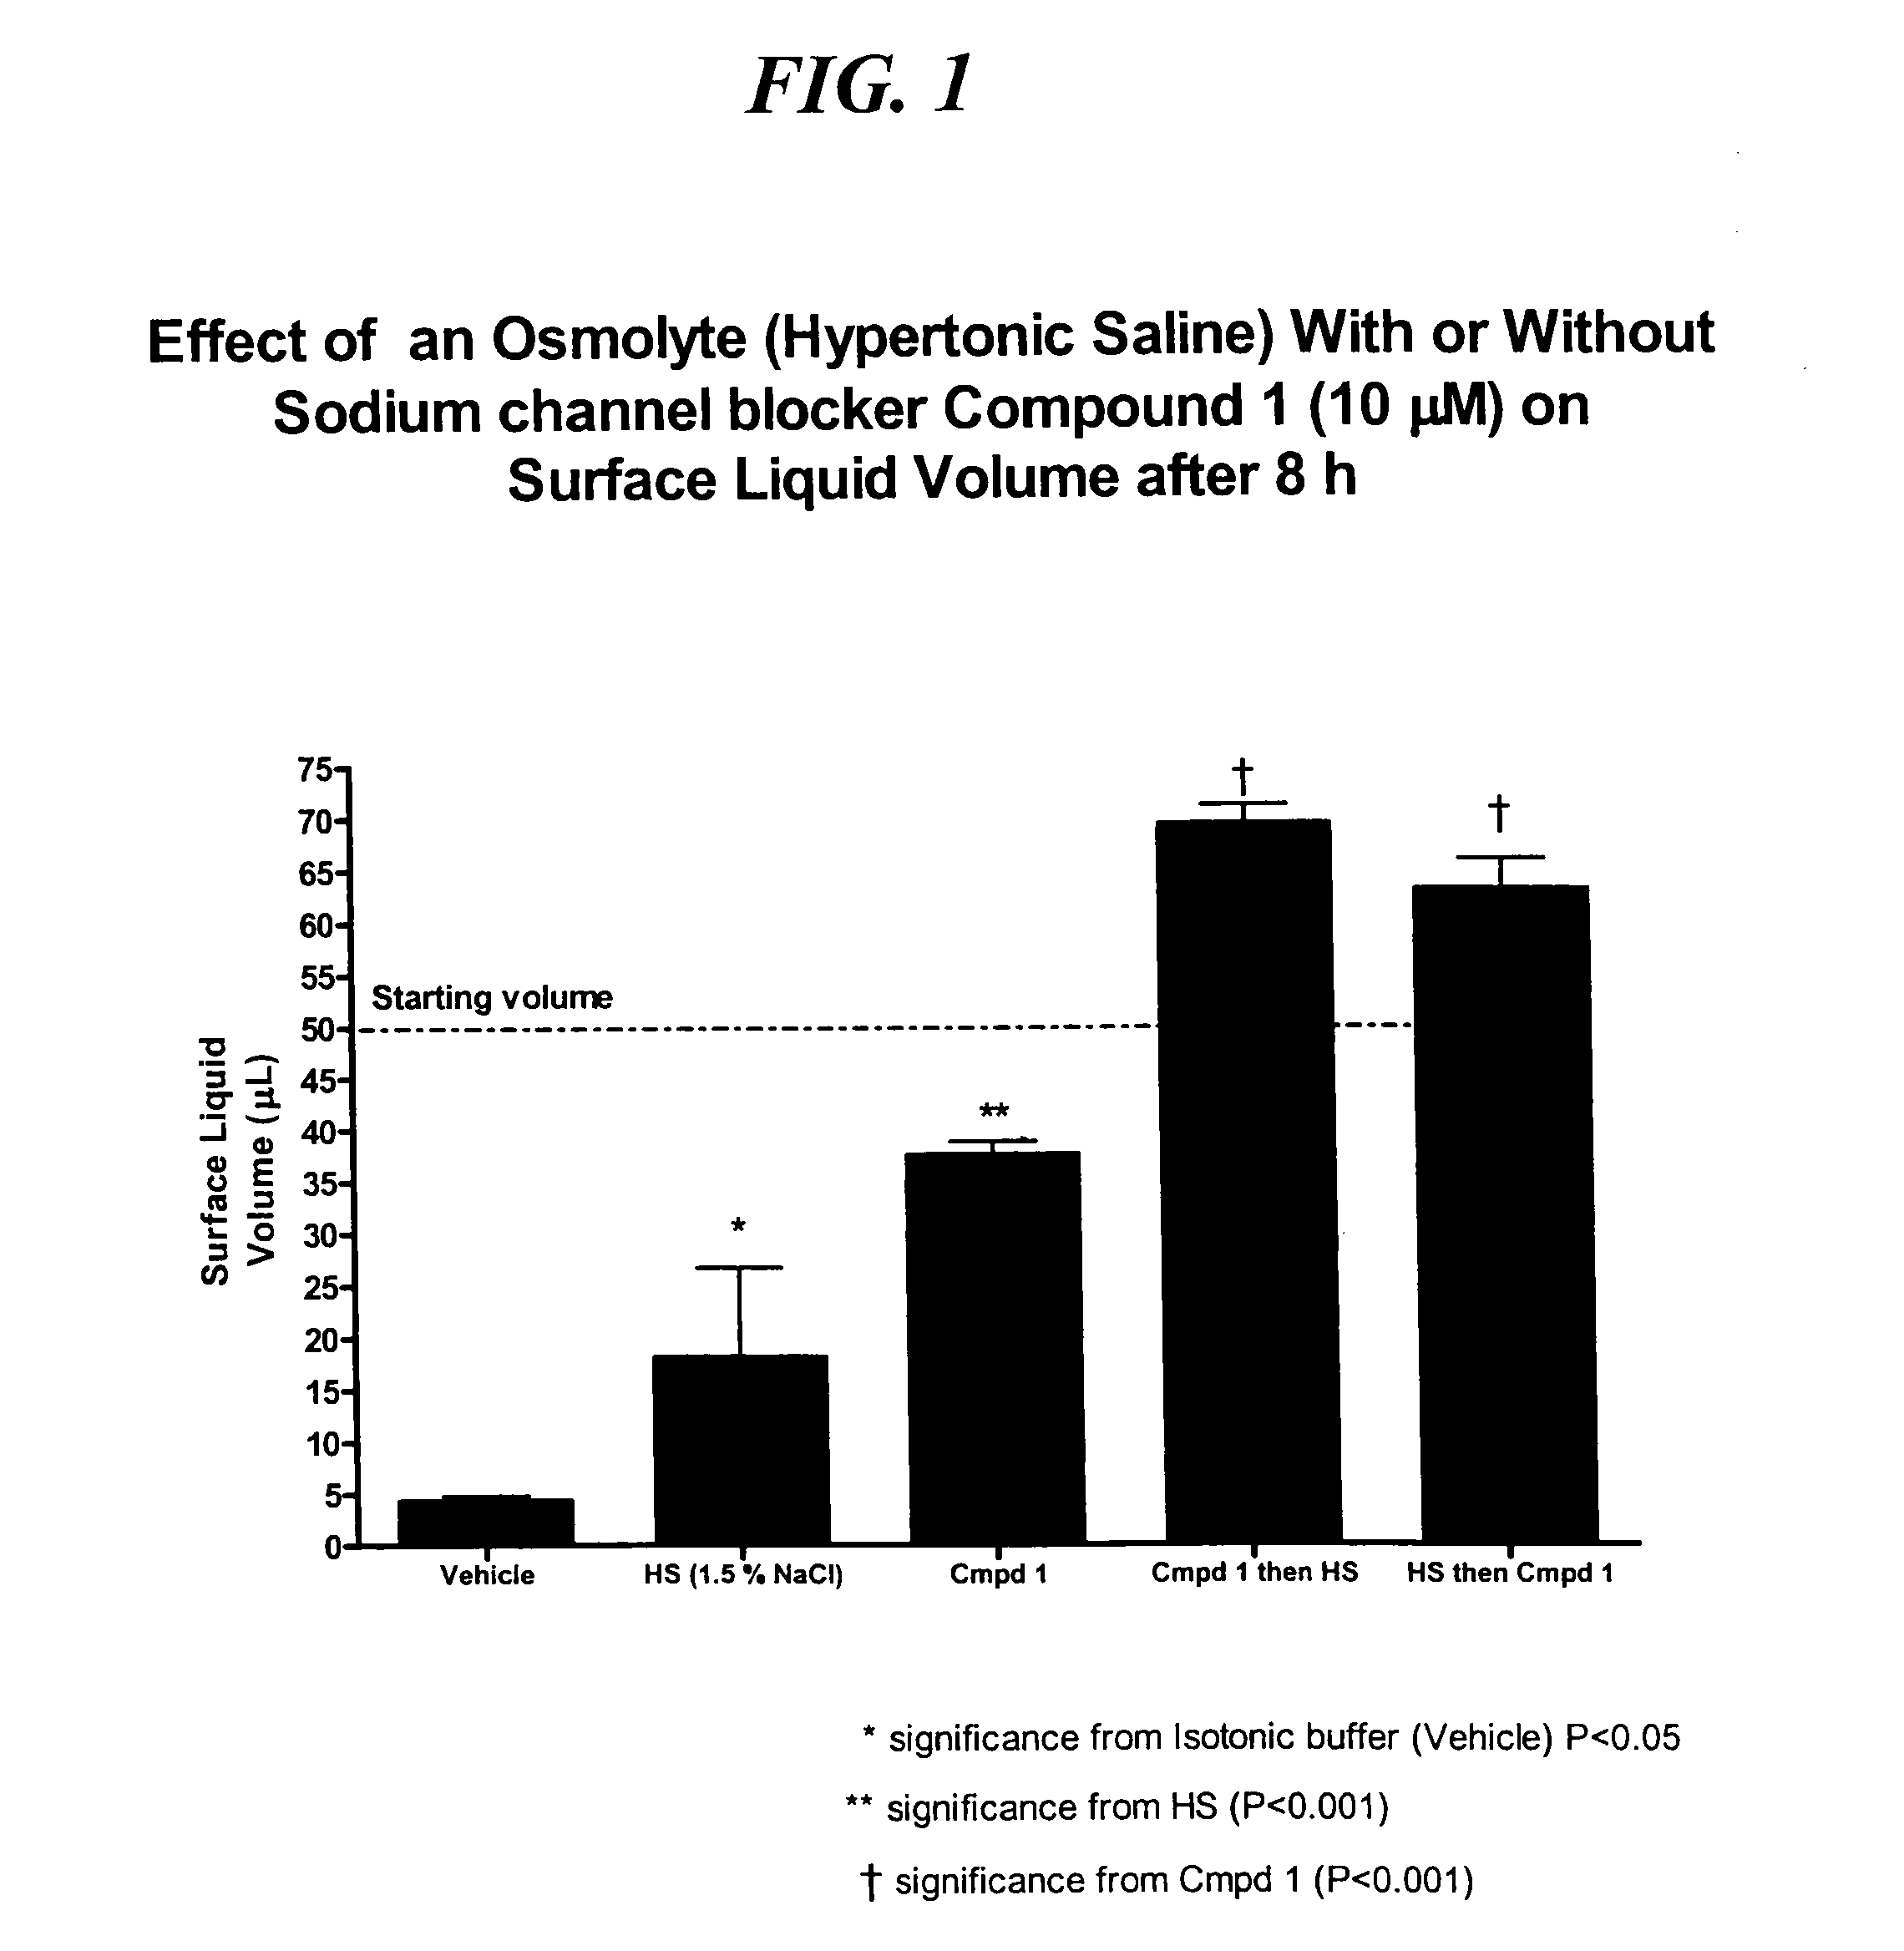 Methods of enhancing mucosal hydration and mucosal clearance by treatment with sodium channel blockers and osmolytes